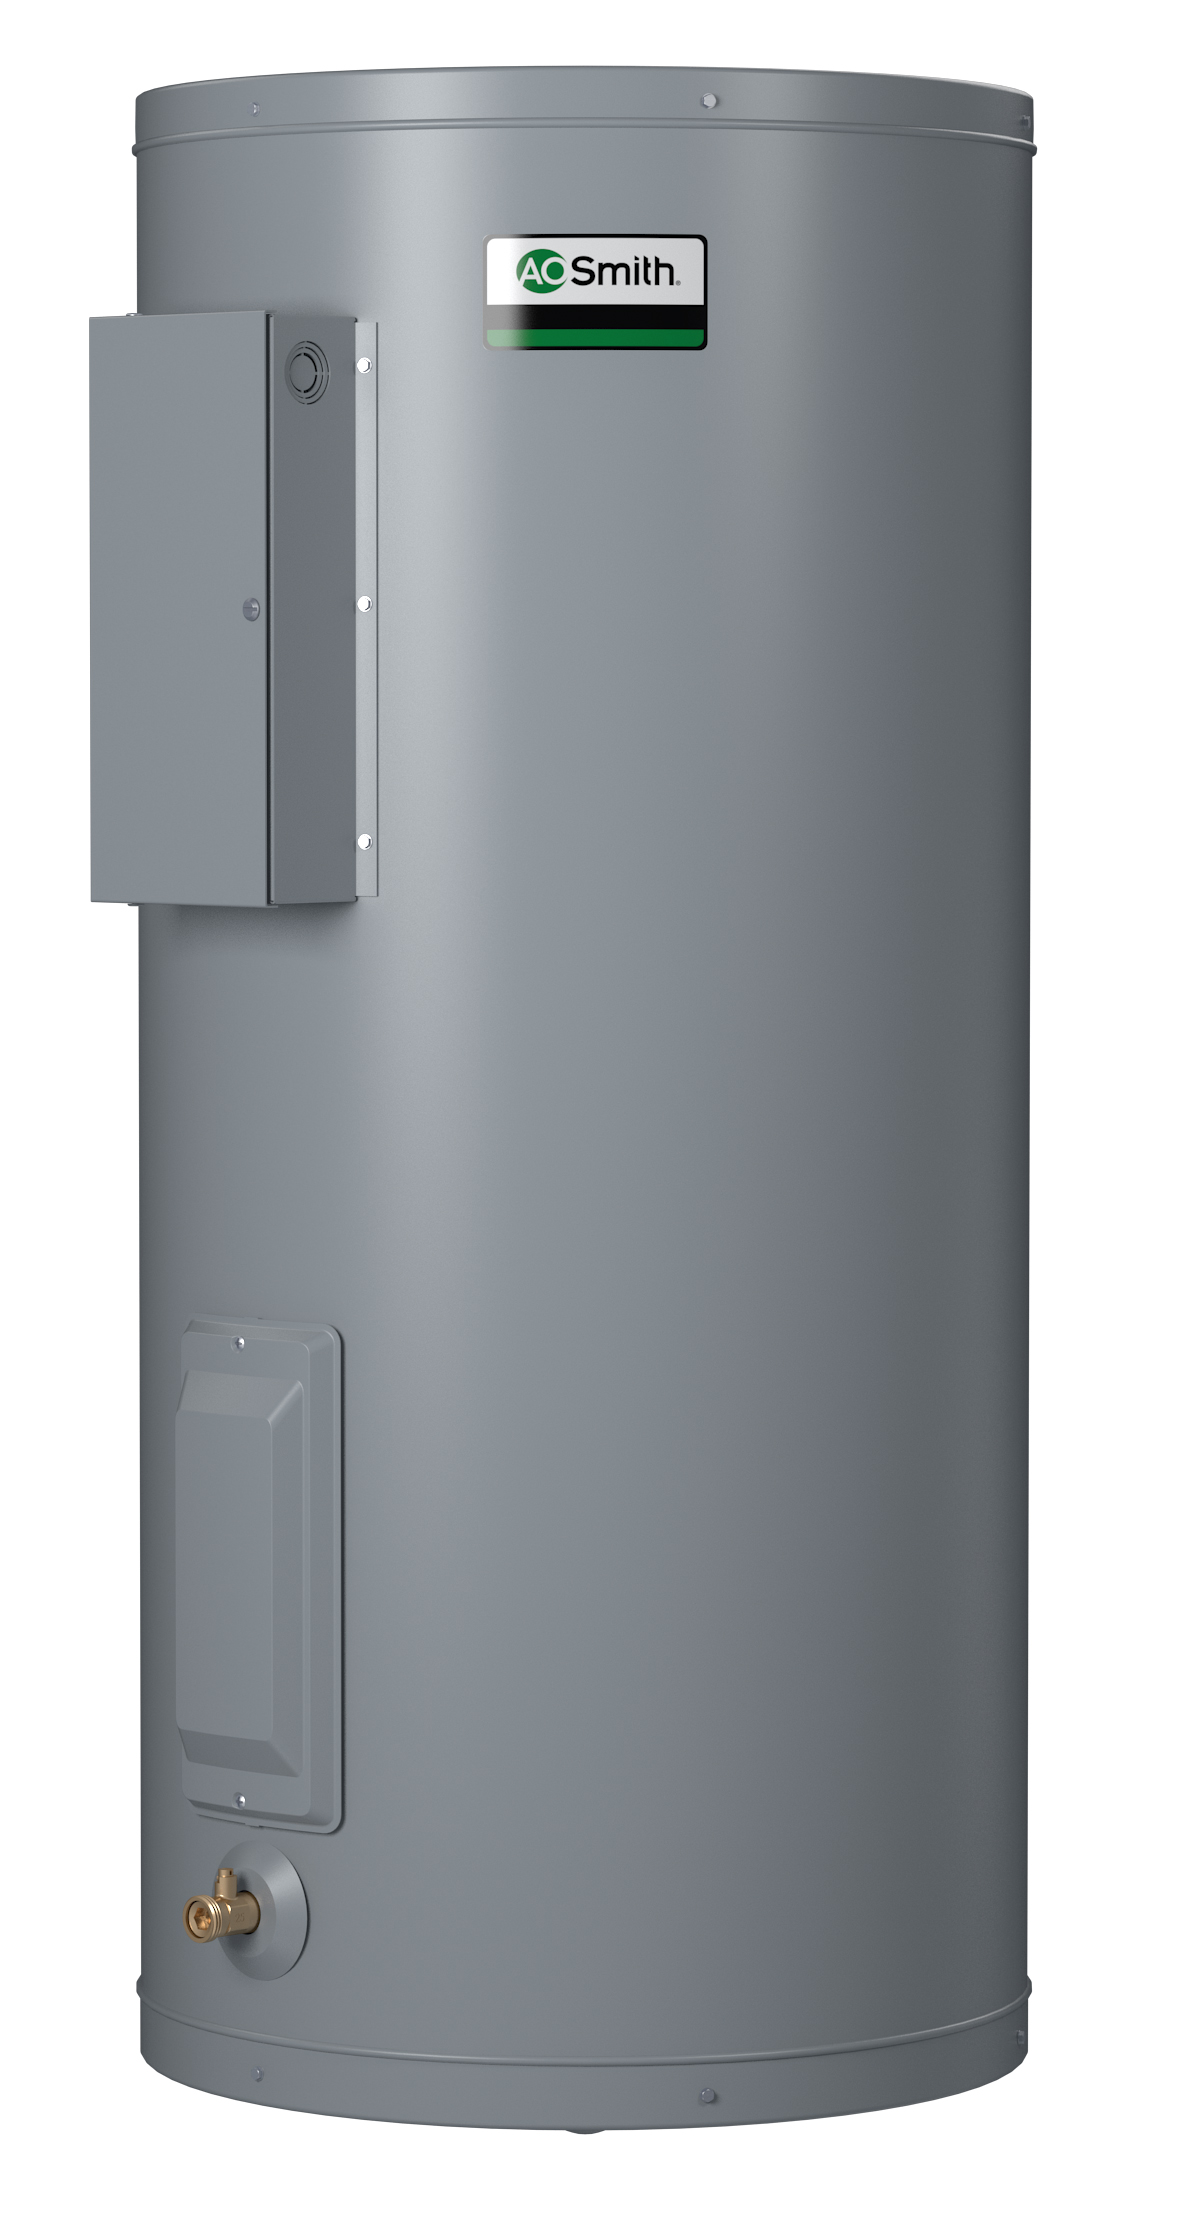 AO SMITH DEN-120D: 120 GALLONS, 1.5KW, 208 VOLT, 1 PHASE, (2-1500 WATT ELEMENTS, NON-SIMULTANEOUS WIRING), DURA-POWER, LIGHT DUTY COMMERCIAL ELECTRIC WATER HEATER